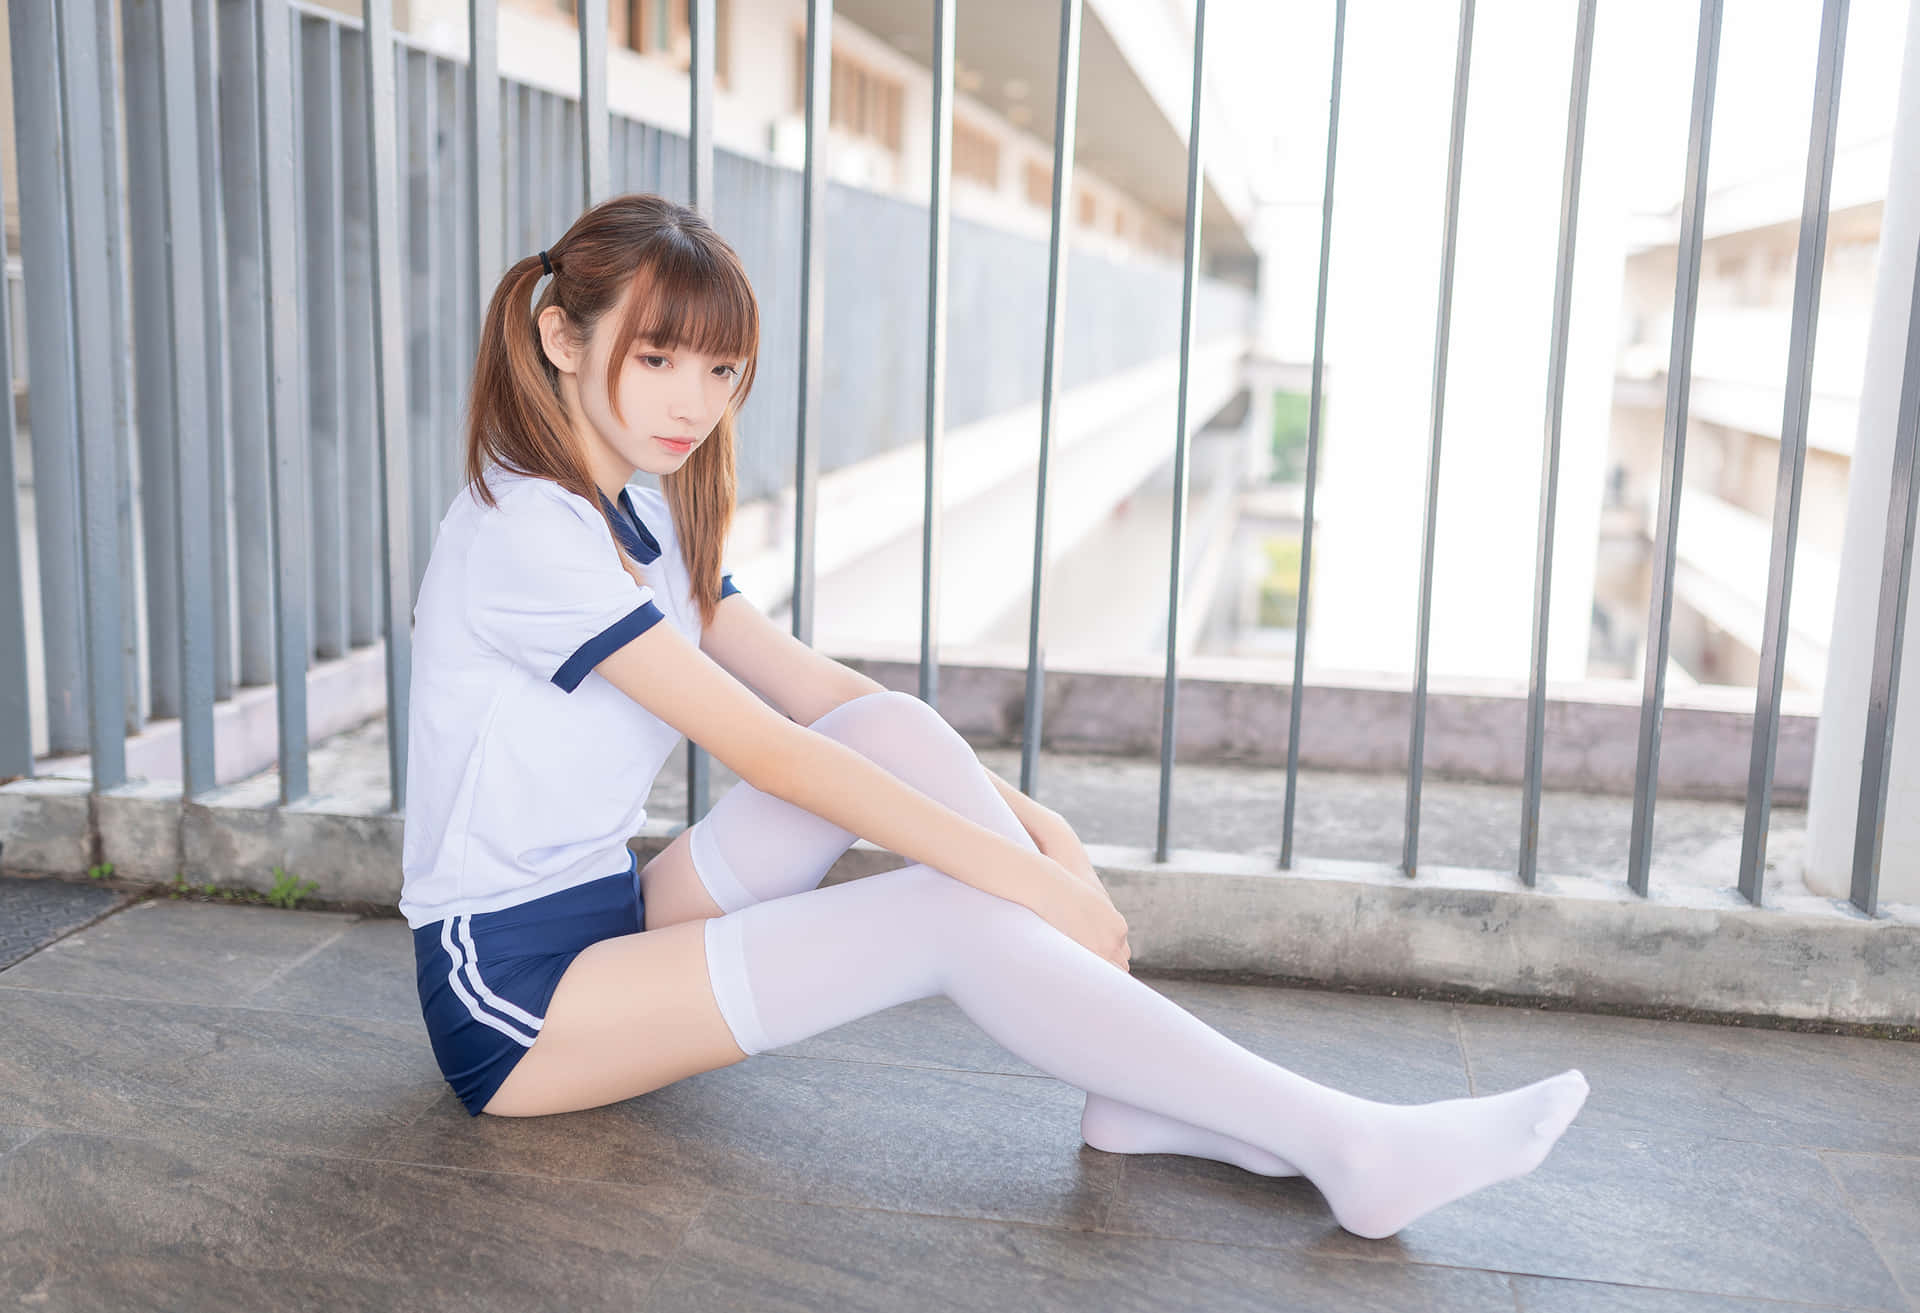 Girl With Pigtails Wearing Thigh Highs Wallpaper